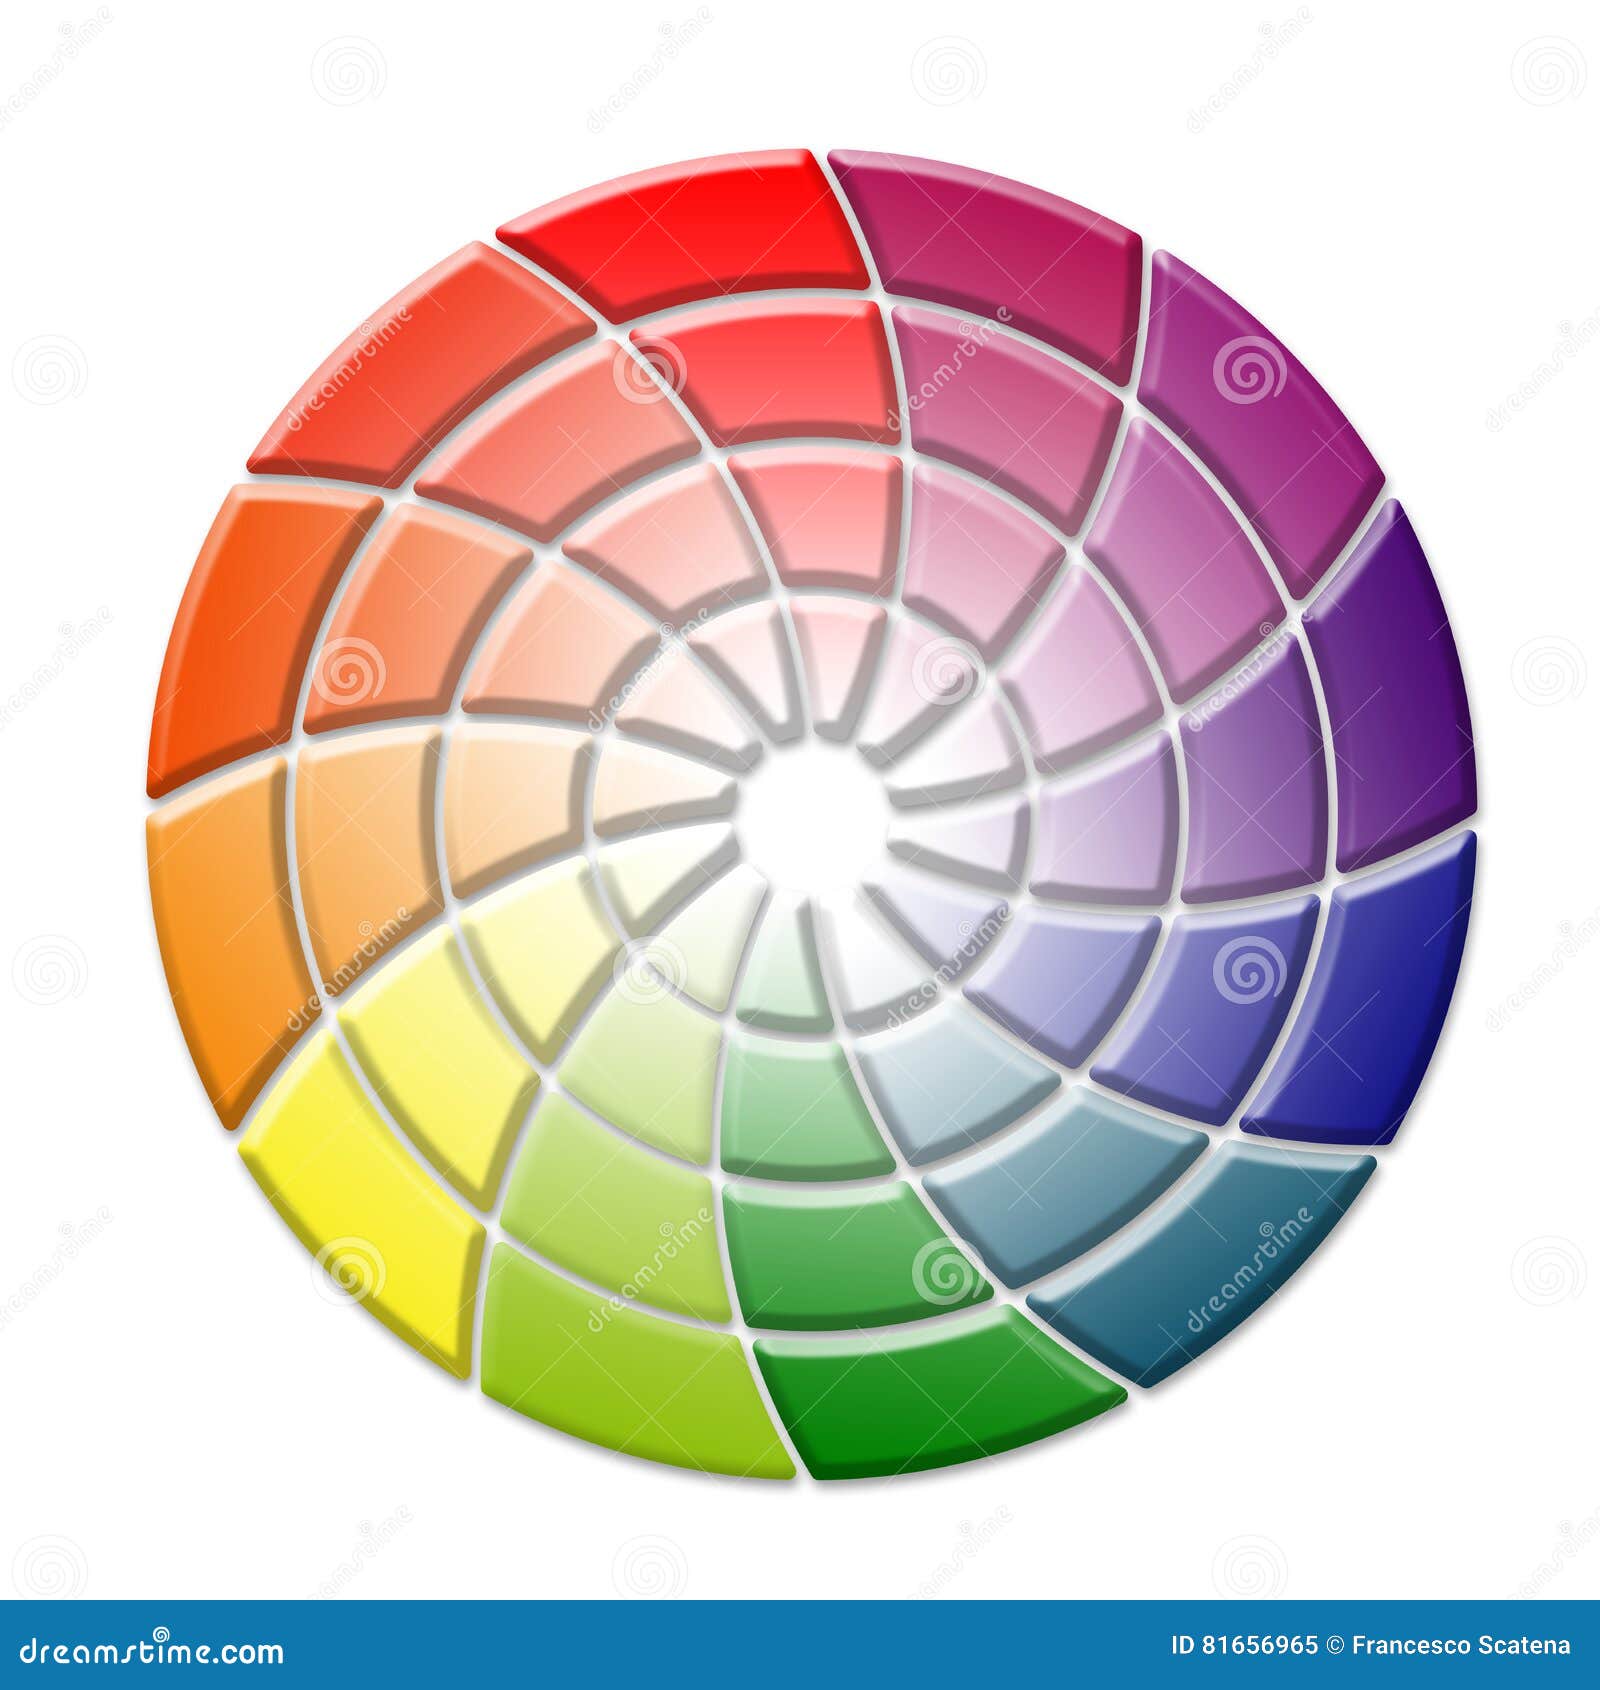 tridimensional color wheel concept on white background